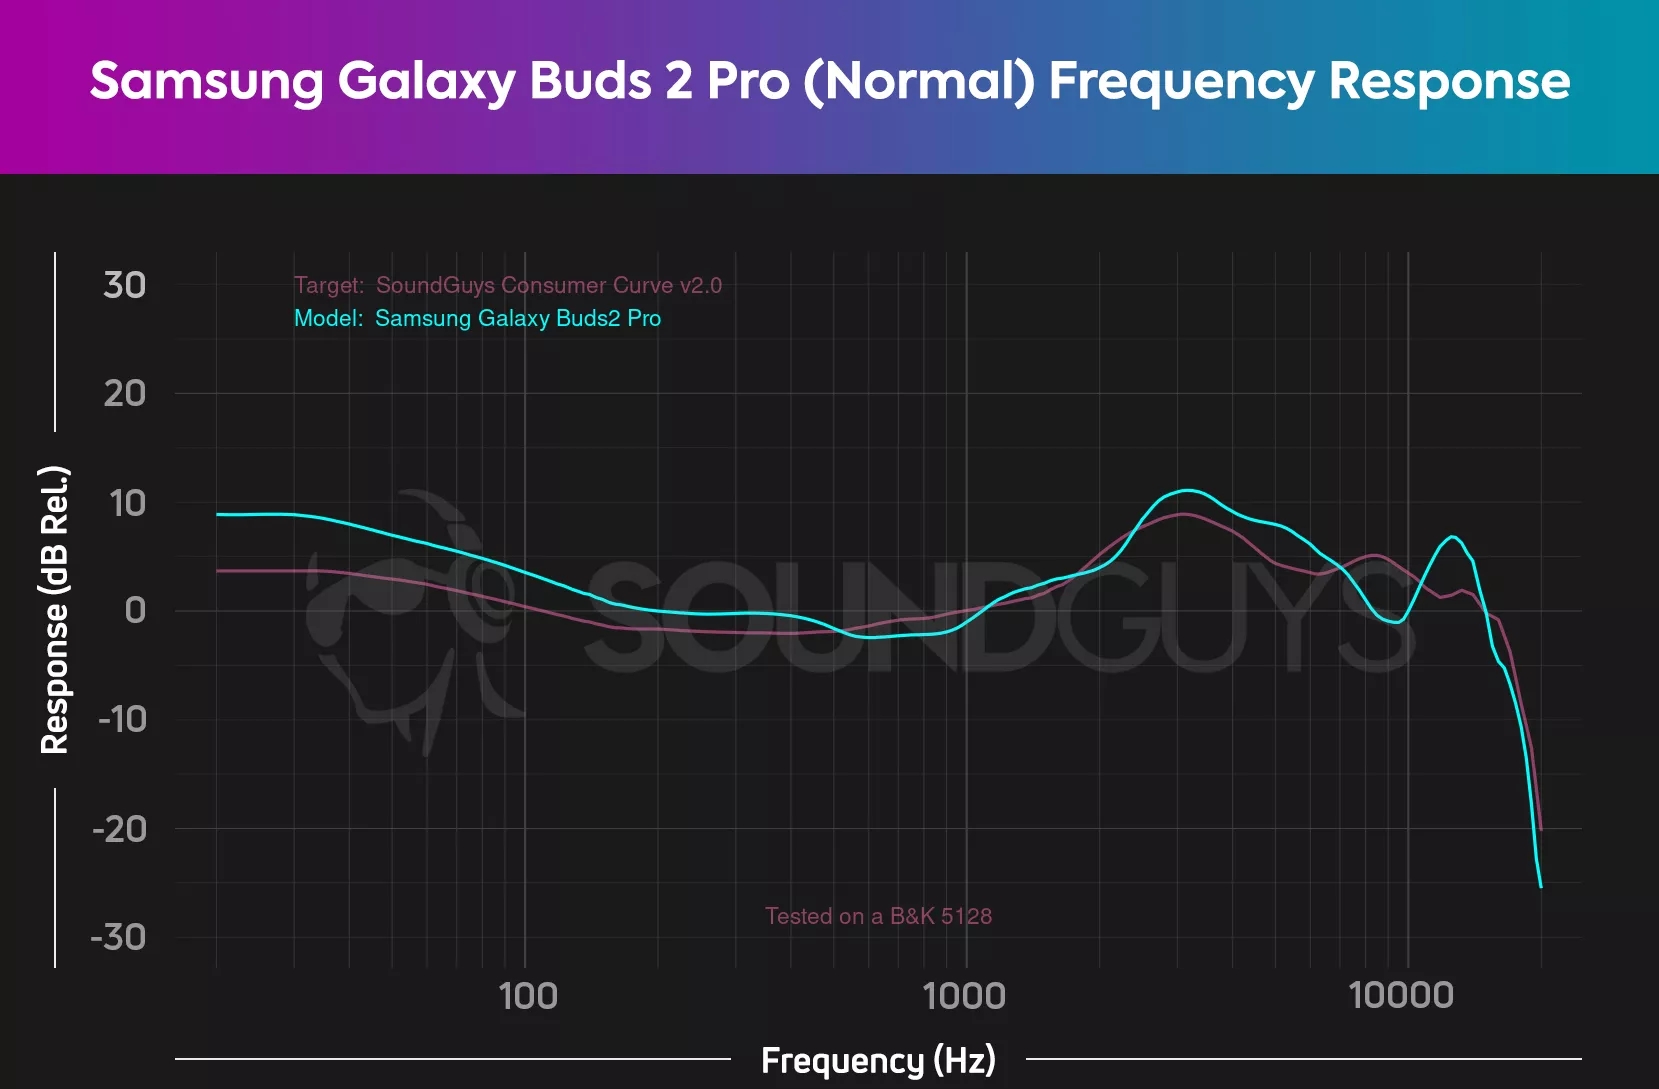 The normal EQ frequency response of the Samsung Galaxy Buds 2 Pro as compared to the target curve, which it follows closely.